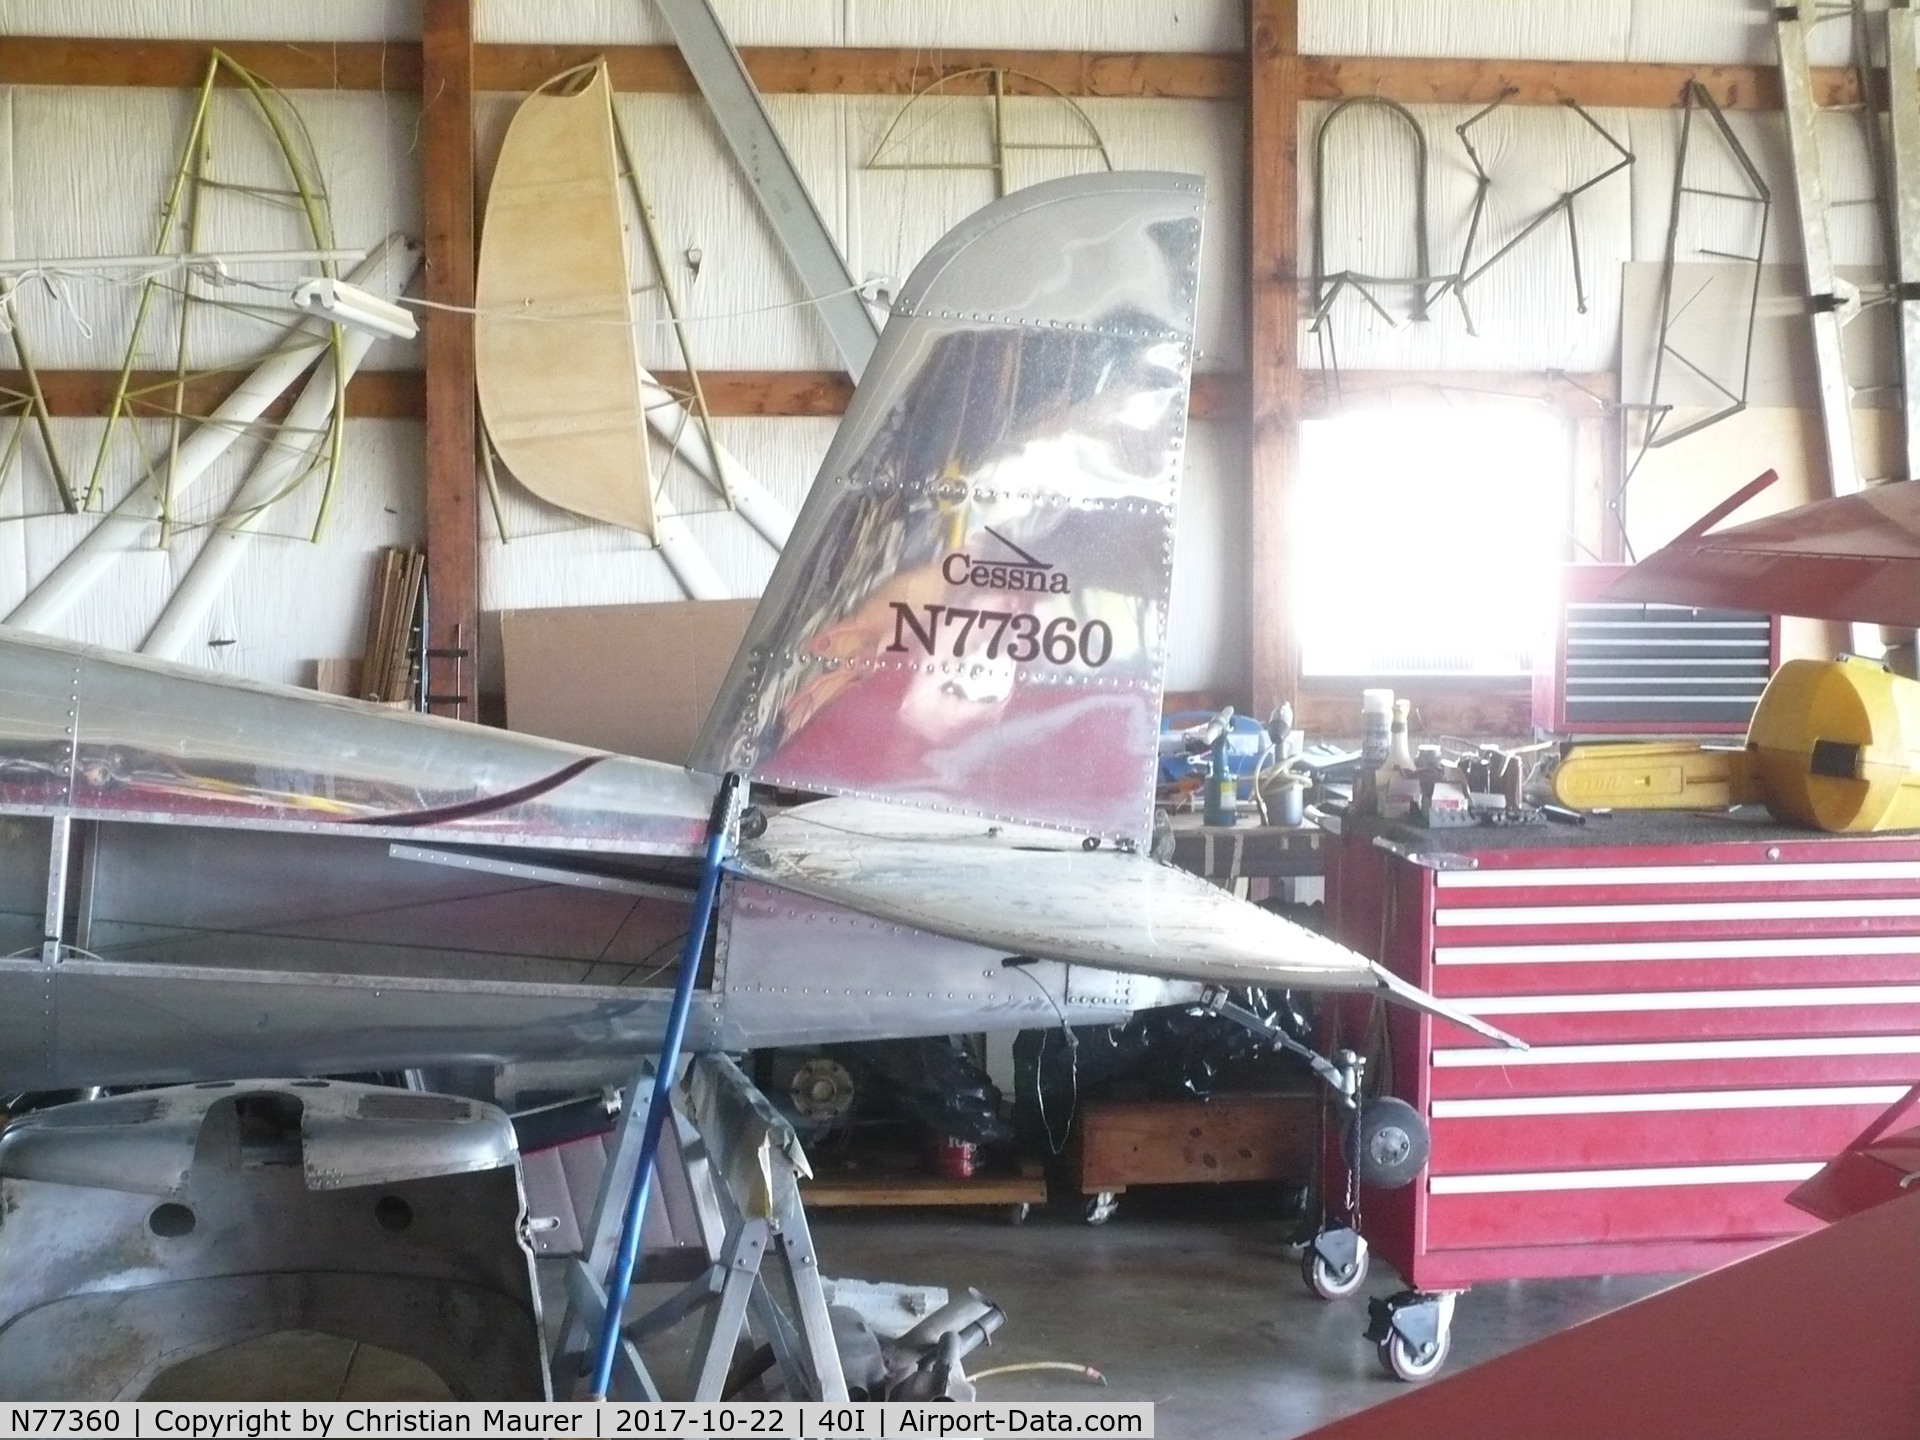 N77360, Cessna 120 C/N 11801, Tail Section of this Cessna 120